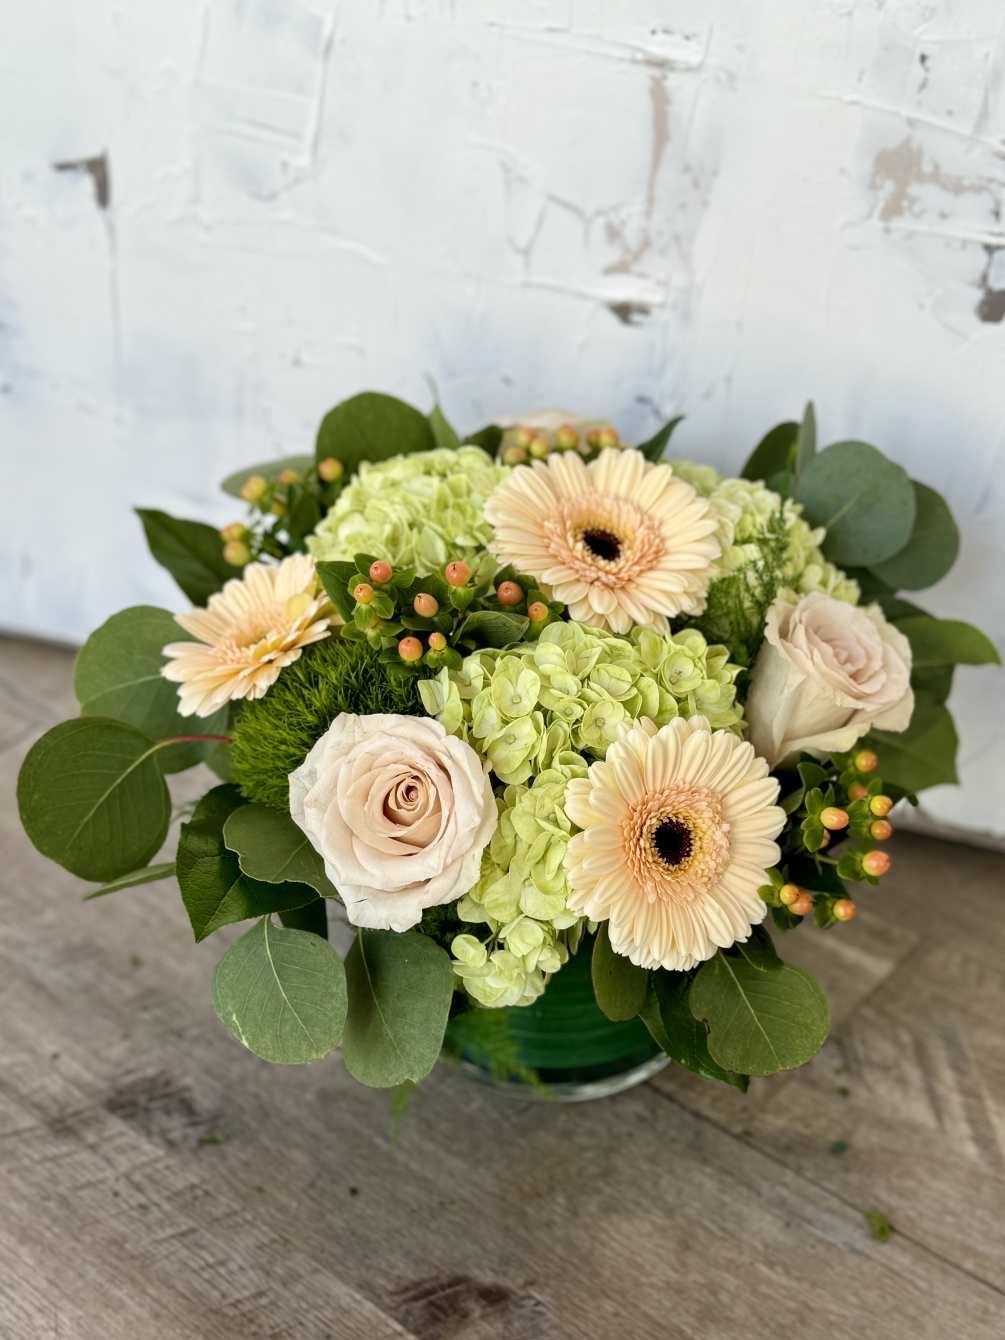 This Gerber Delight arrangement features lush green Hydrangeas and is complemented by